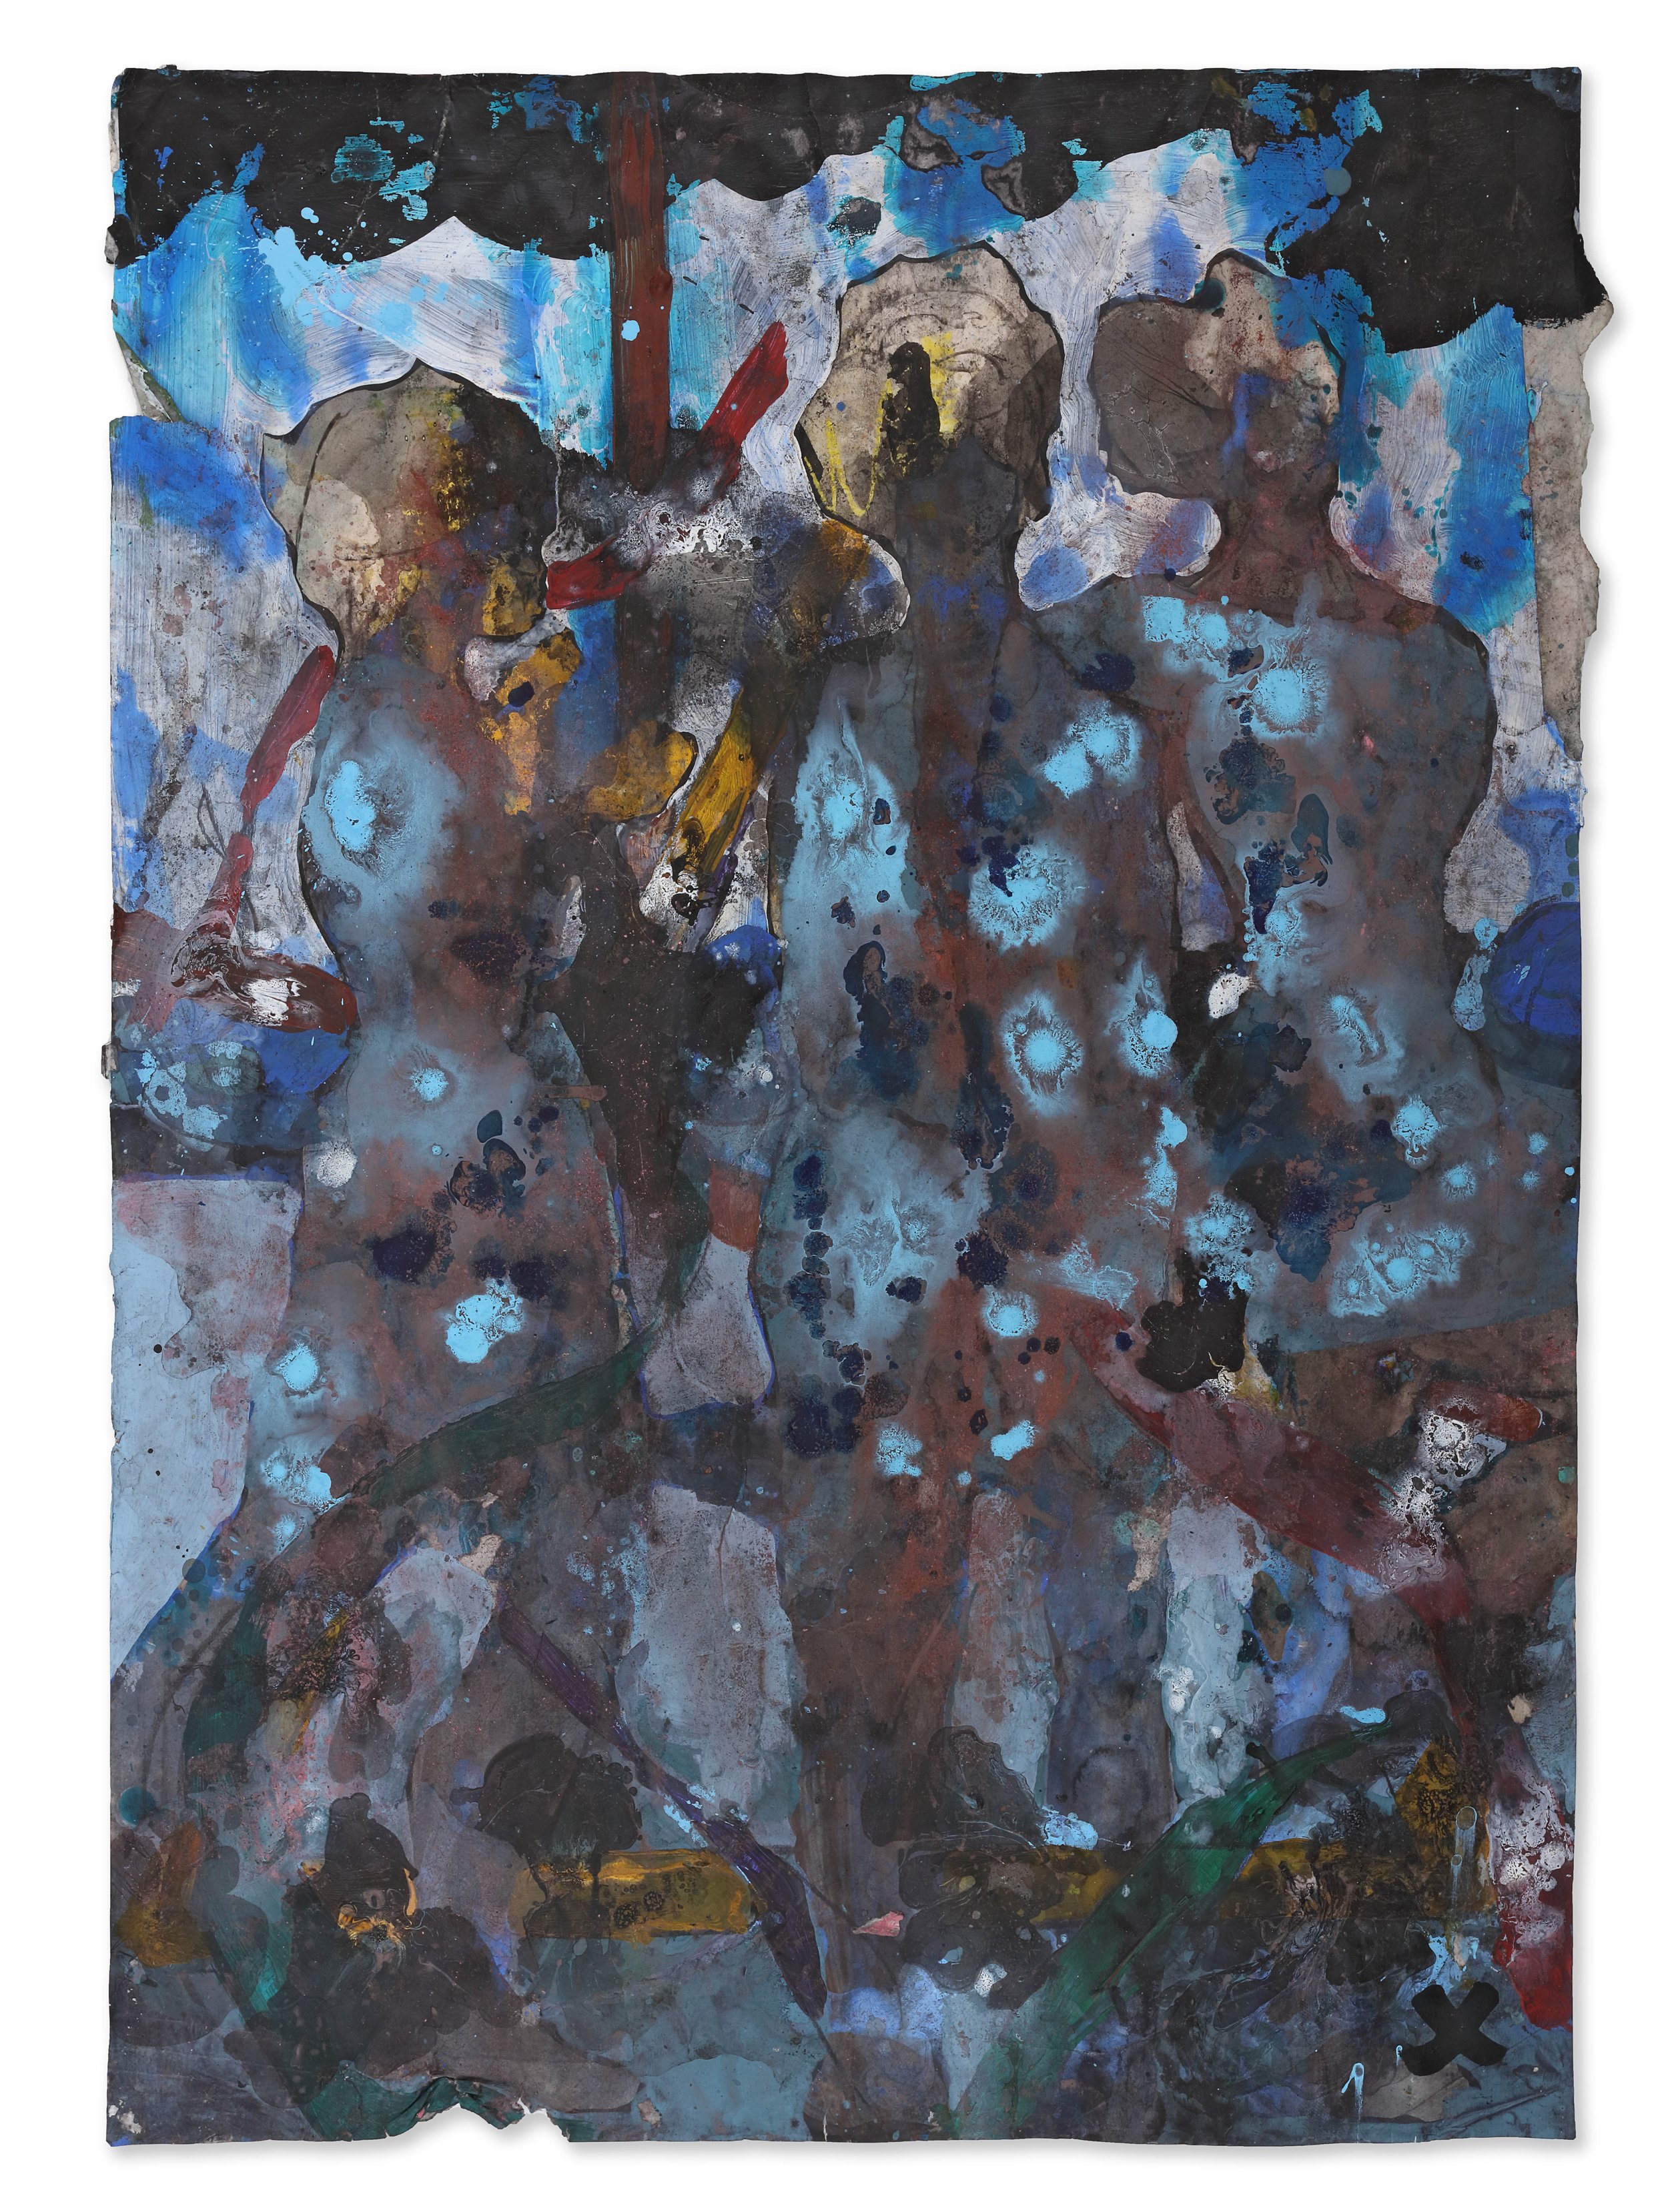 SHADOWS BEYOND THE REEF. ACRYLIC, CHARCOAL, INK, PIGMENT, WATER, PAPER. 2023. DEANIO X.jpg